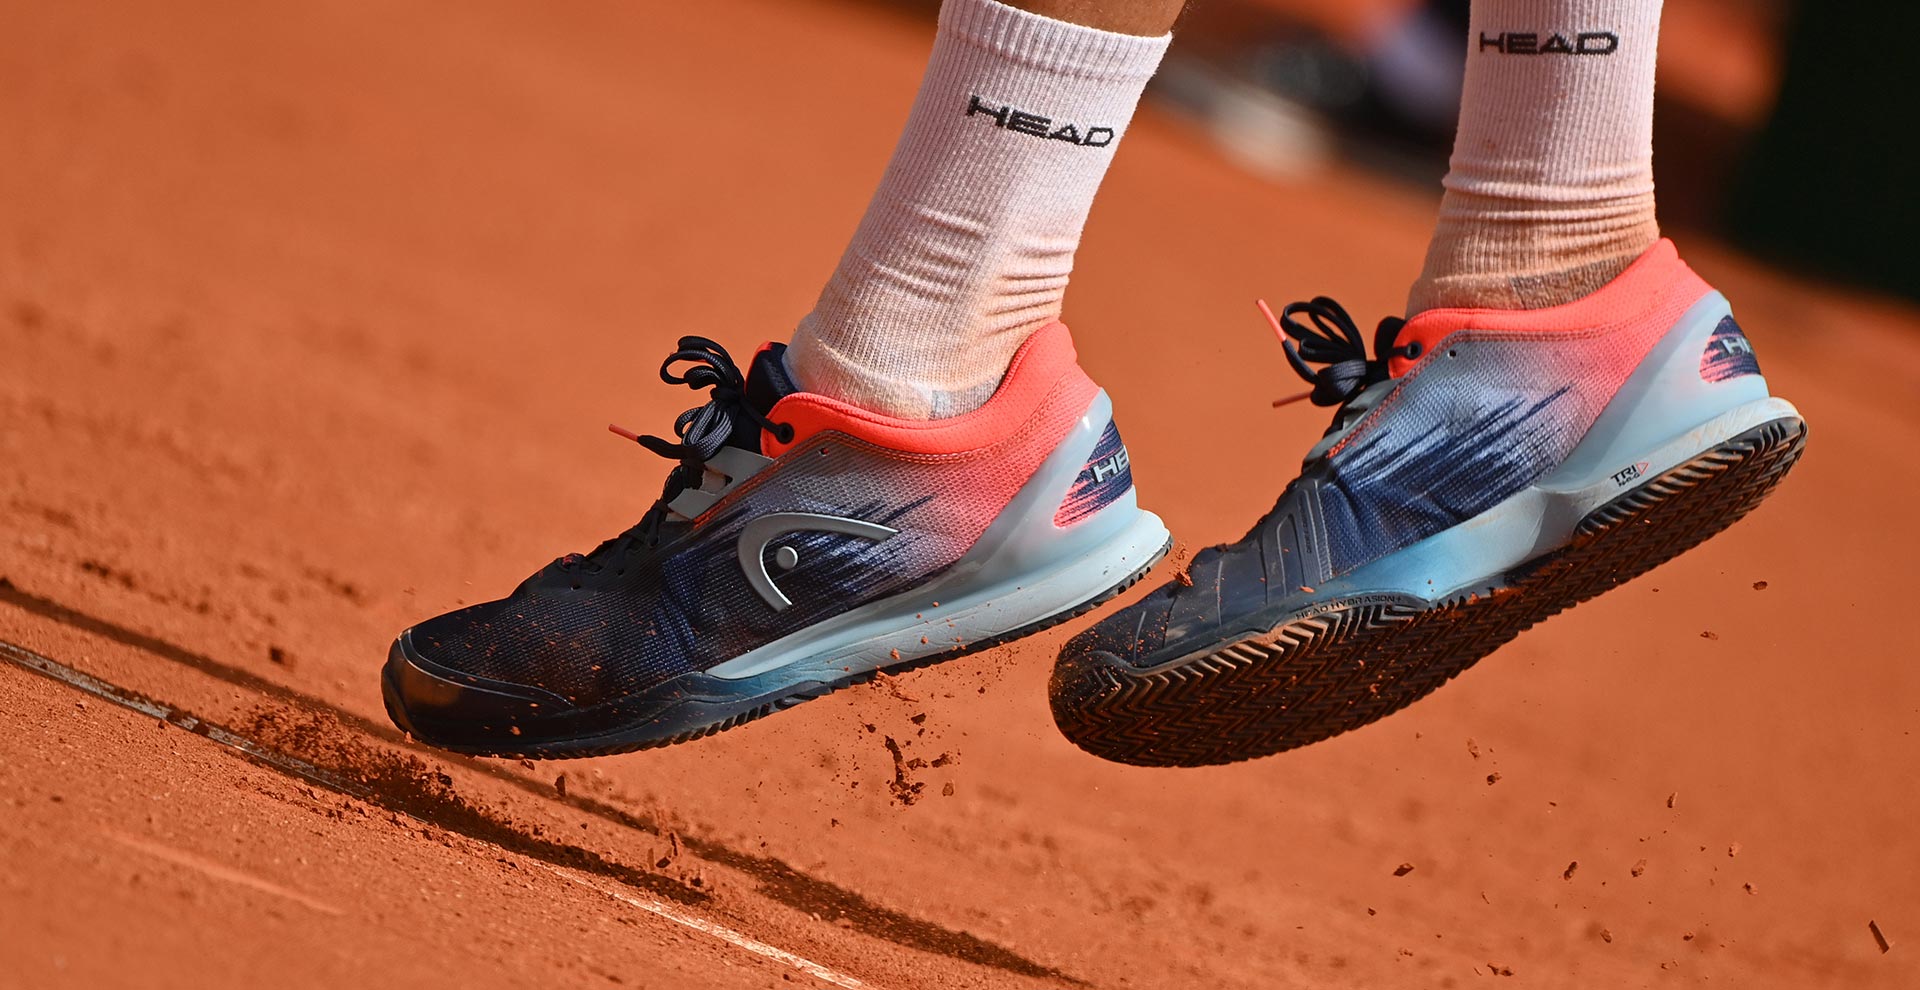 List of 7 Best Clay Court Tennis Shoes In 2022